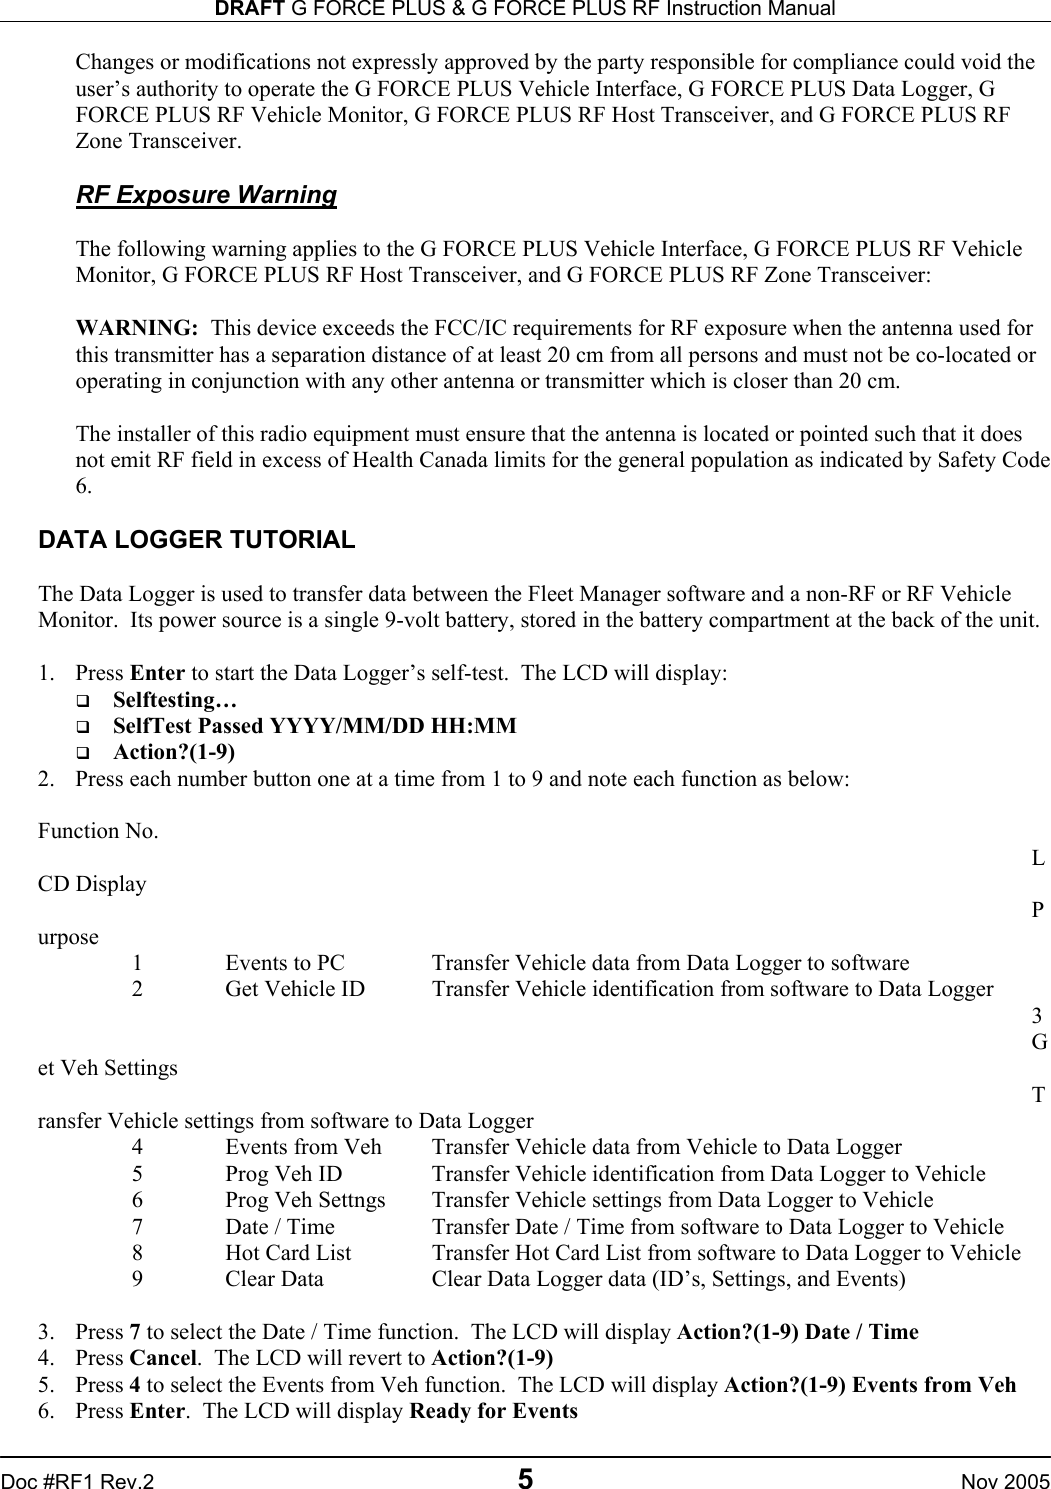 DRAFT G FORCE PLUS &amp; G FORCE PLUS RF Instruction Manual   Doc #RF1 Rev.2  5  Nov 2005 Changes or modifications not expressly approved by the party responsible for compliance could void the user’s authority to operate the G FORCE PLUS Vehicle Interface, G FORCE PLUS Data Logger, G FORCE PLUS RF Vehicle Monitor, G FORCE PLUS RF Host Transceiver, and G FORCE PLUS RF Zone Transceiver.  RF Exposure Warning  The following warning applies to the G FORCE PLUS Vehicle Interface, G FORCE PLUS RF Vehicle Monitor, G FORCE PLUS RF Host Transceiver, and G FORCE PLUS RF Zone Transceiver:  WARNING:  This device exceeds the FCC/IC requirements for RF exposure when the antenna used for this transmitter has a separation distance of at least 20 cm from all persons and must not be co-located or operating in conjunction with any other antenna or transmitter which is closer than 20 cm.  The installer of this radio equipment must ensure that the antenna is located or pointed such that it does not emit RF field in excess of Health Canada limits for the general population as indicated by Safety Code 6.   DATA LOGGER TUTORIAL  The Data Logger is used to transfer data between the Fleet Manager software and a non-RF or RF Vehicle Monitor.  Its power source is a single 9-volt battery, stored in the battery compartment at the back of the unit.  1. Press Enter to start the Data Logger’s self-test.  The LCD will display:   Selftesting…   SelfTest Passed YYYY/MM/DD HH:MM   Action?(1-9) 2.  Press each number button one at a time from 1 to 9 and note each function as below:  Function No.  LCD Display  Purpose   1  Events to PC  Transfer Vehicle data from Data Logger to software    2  Get Vehicle ID  Transfer Vehicle identification from software to Data Logger   3  Get Veh Settings  Transfer Vehicle settings from software to Data Logger   4  Events from Veh  Transfer Vehicle data from Vehicle to Data Logger   5  Prog Veh ID  Transfer Vehicle identification from Data Logger to Vehicle   6  Prog Veh Settngs  Transfer Vehicle settings from Data Logger to Vehicle     7  Date / Time  Transfer Date / Time from software to Data Logger to Vehicle   8  Hot Card List  Transfer Hot Card List from software to Data Logger to Vehicle   9  Clear Data  Clear Data Logger data (ID’s, Settings, and Events)  3. Press 7 to select the Date / Time function.  The LCD will display Action?(1-9) Date / Time 4. Press Cancel.  The LCD will revert to Action?(1-9) 5. Press 4 to select the Events from Veh function.  The LCD will display Action?(1-9) Events from Veh 6. Press Enter.  The LCD will display Ready for Events 